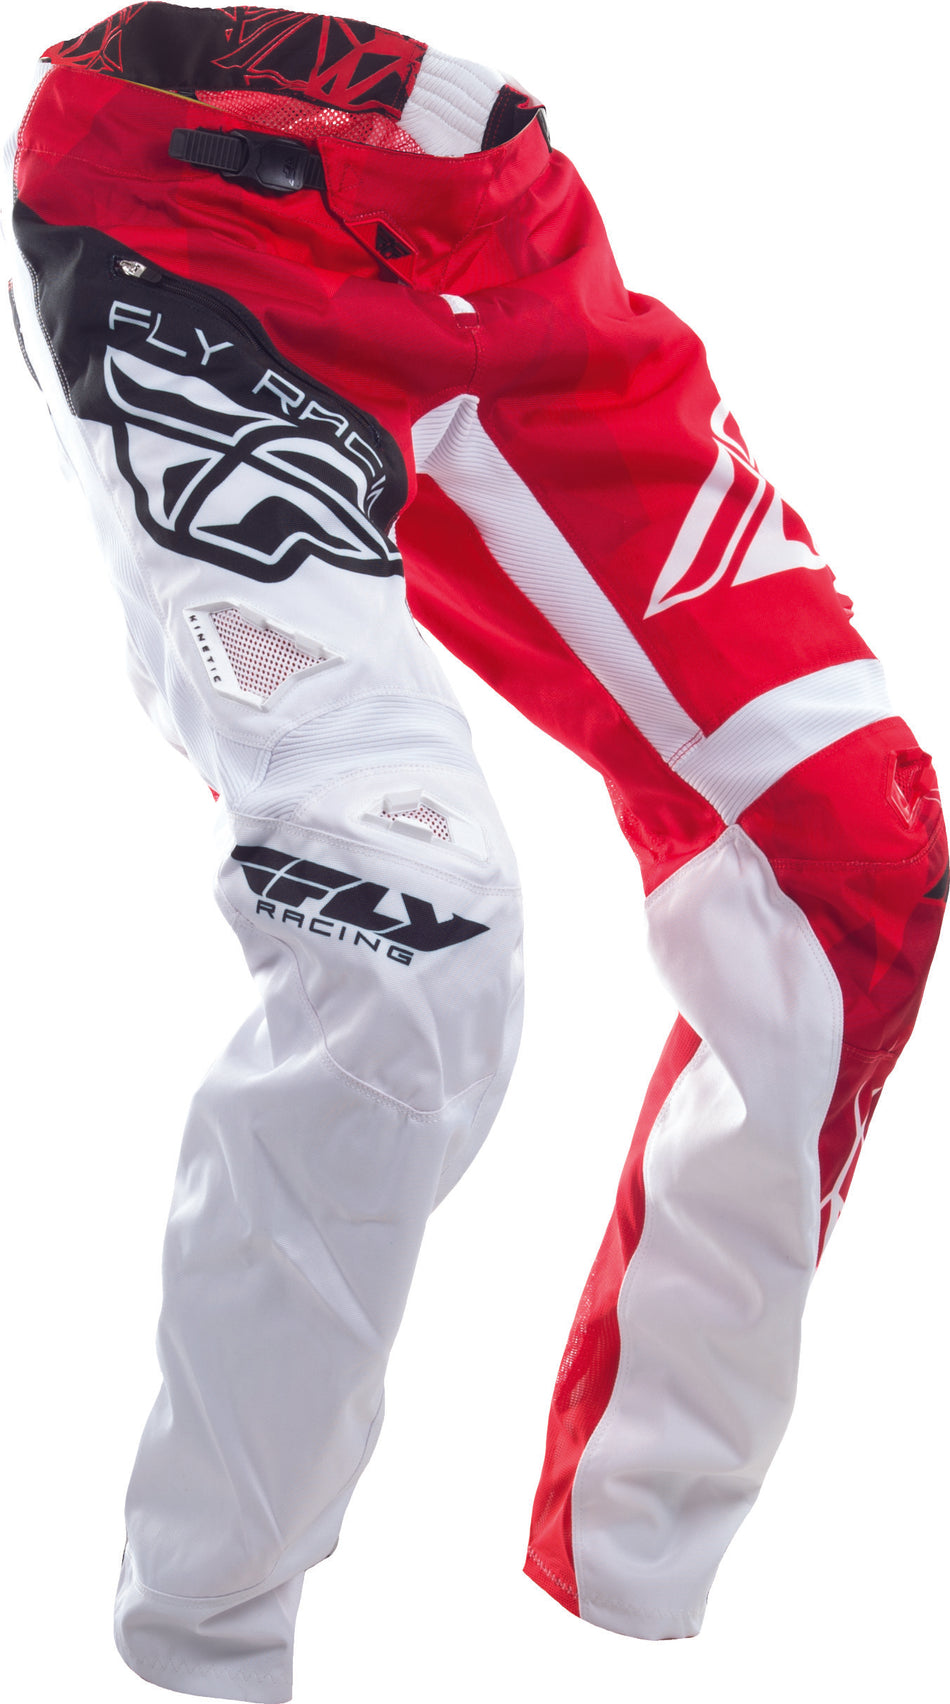 FLY RACING Bicycle Crux Pant Red/White Sz 30 370-02230